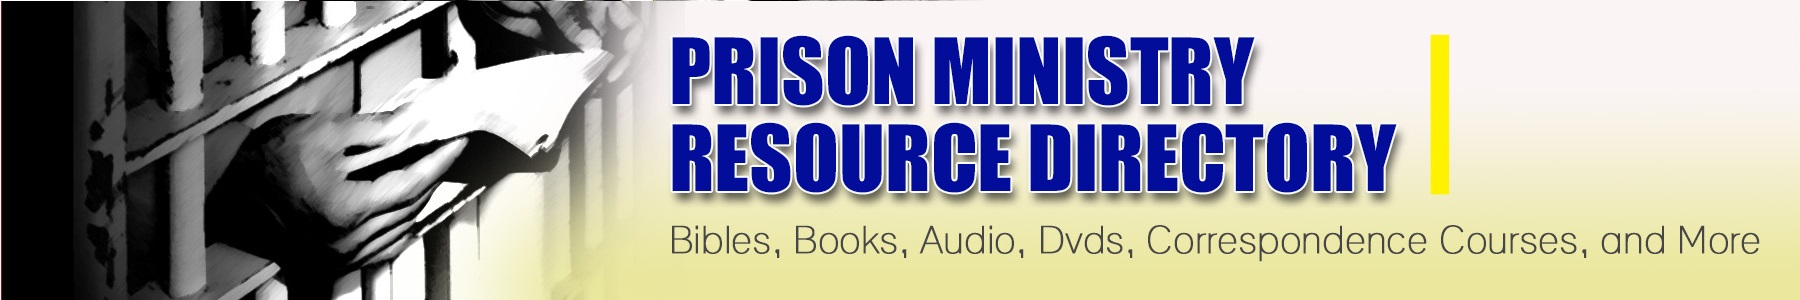 Prison Ministry Resources